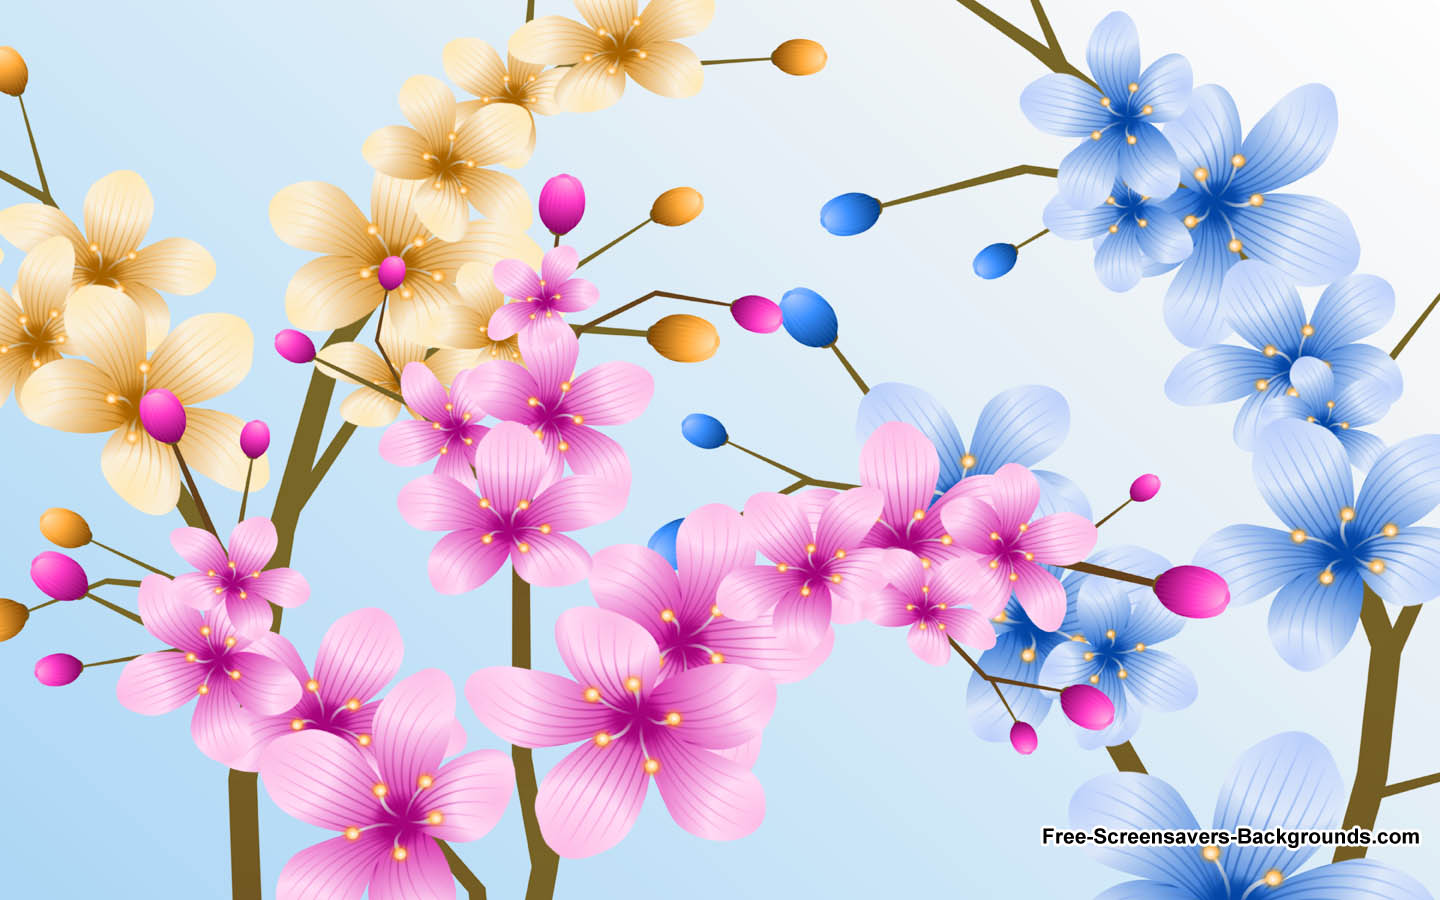 Mixed Flowers In A Pot Wallpaper Screensavers And Background